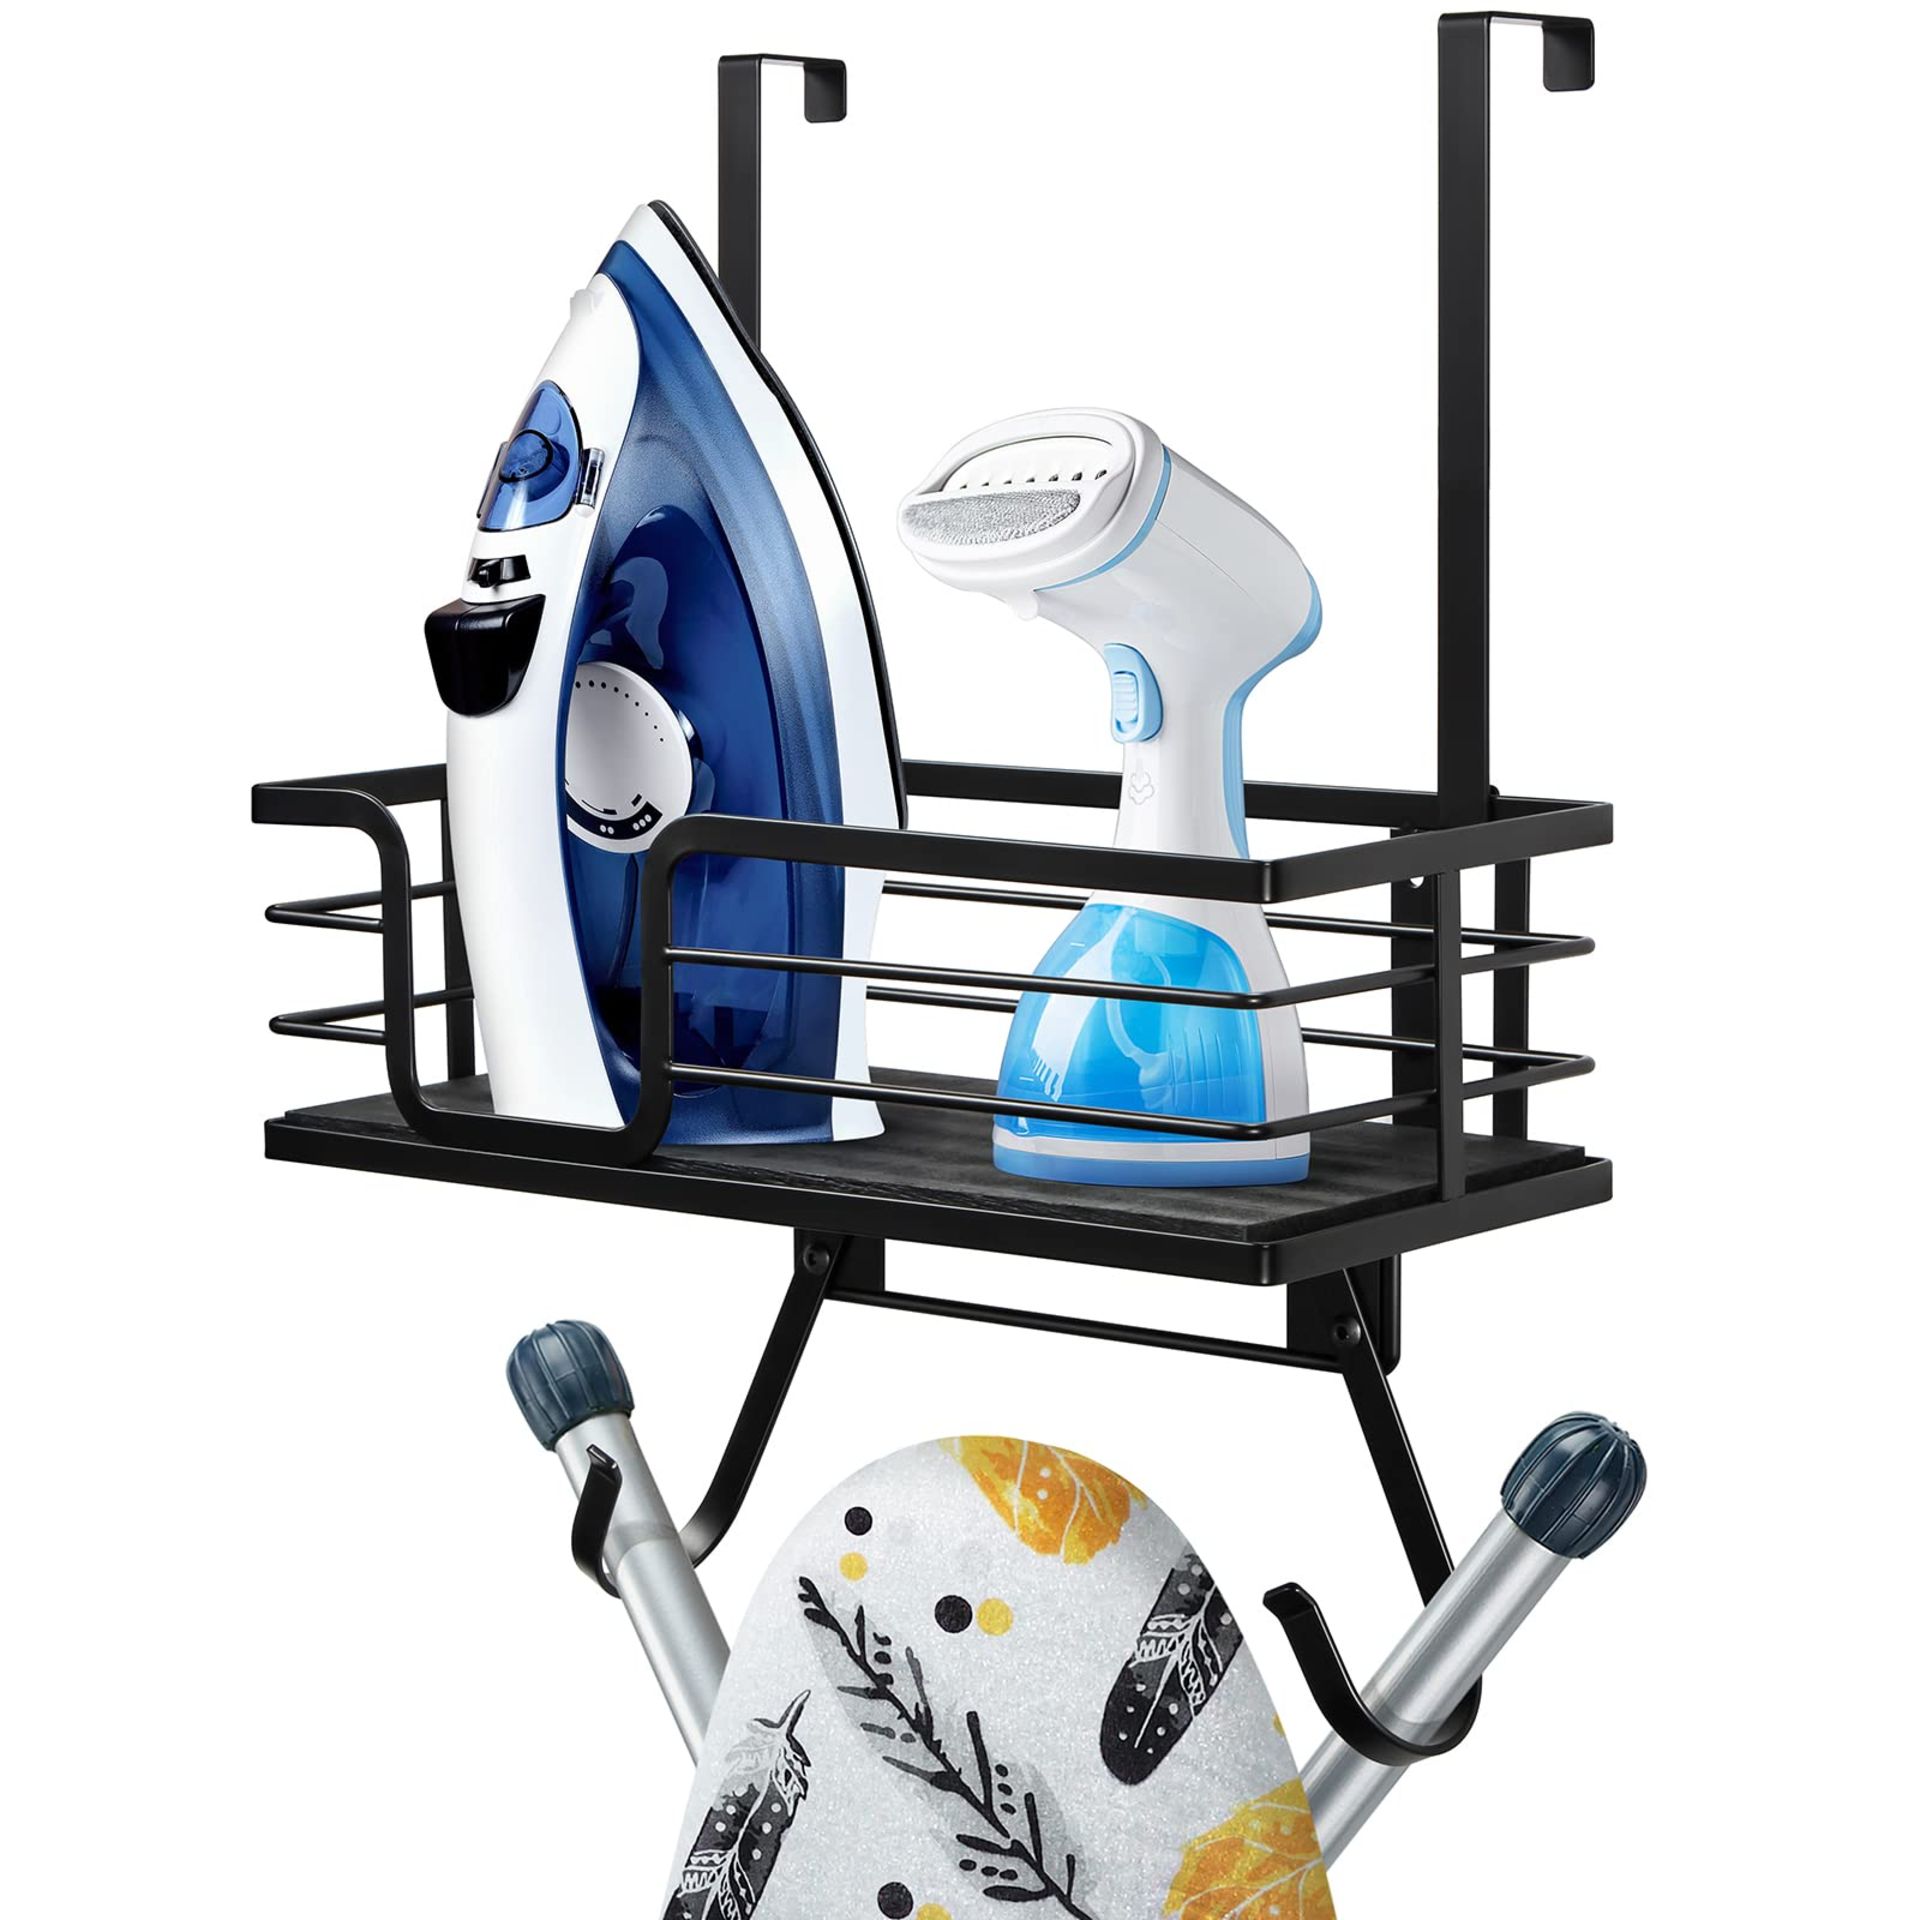 RRP £27.39 TJ.MOREE Wall Mount/Over the Door Ironing Board Holder